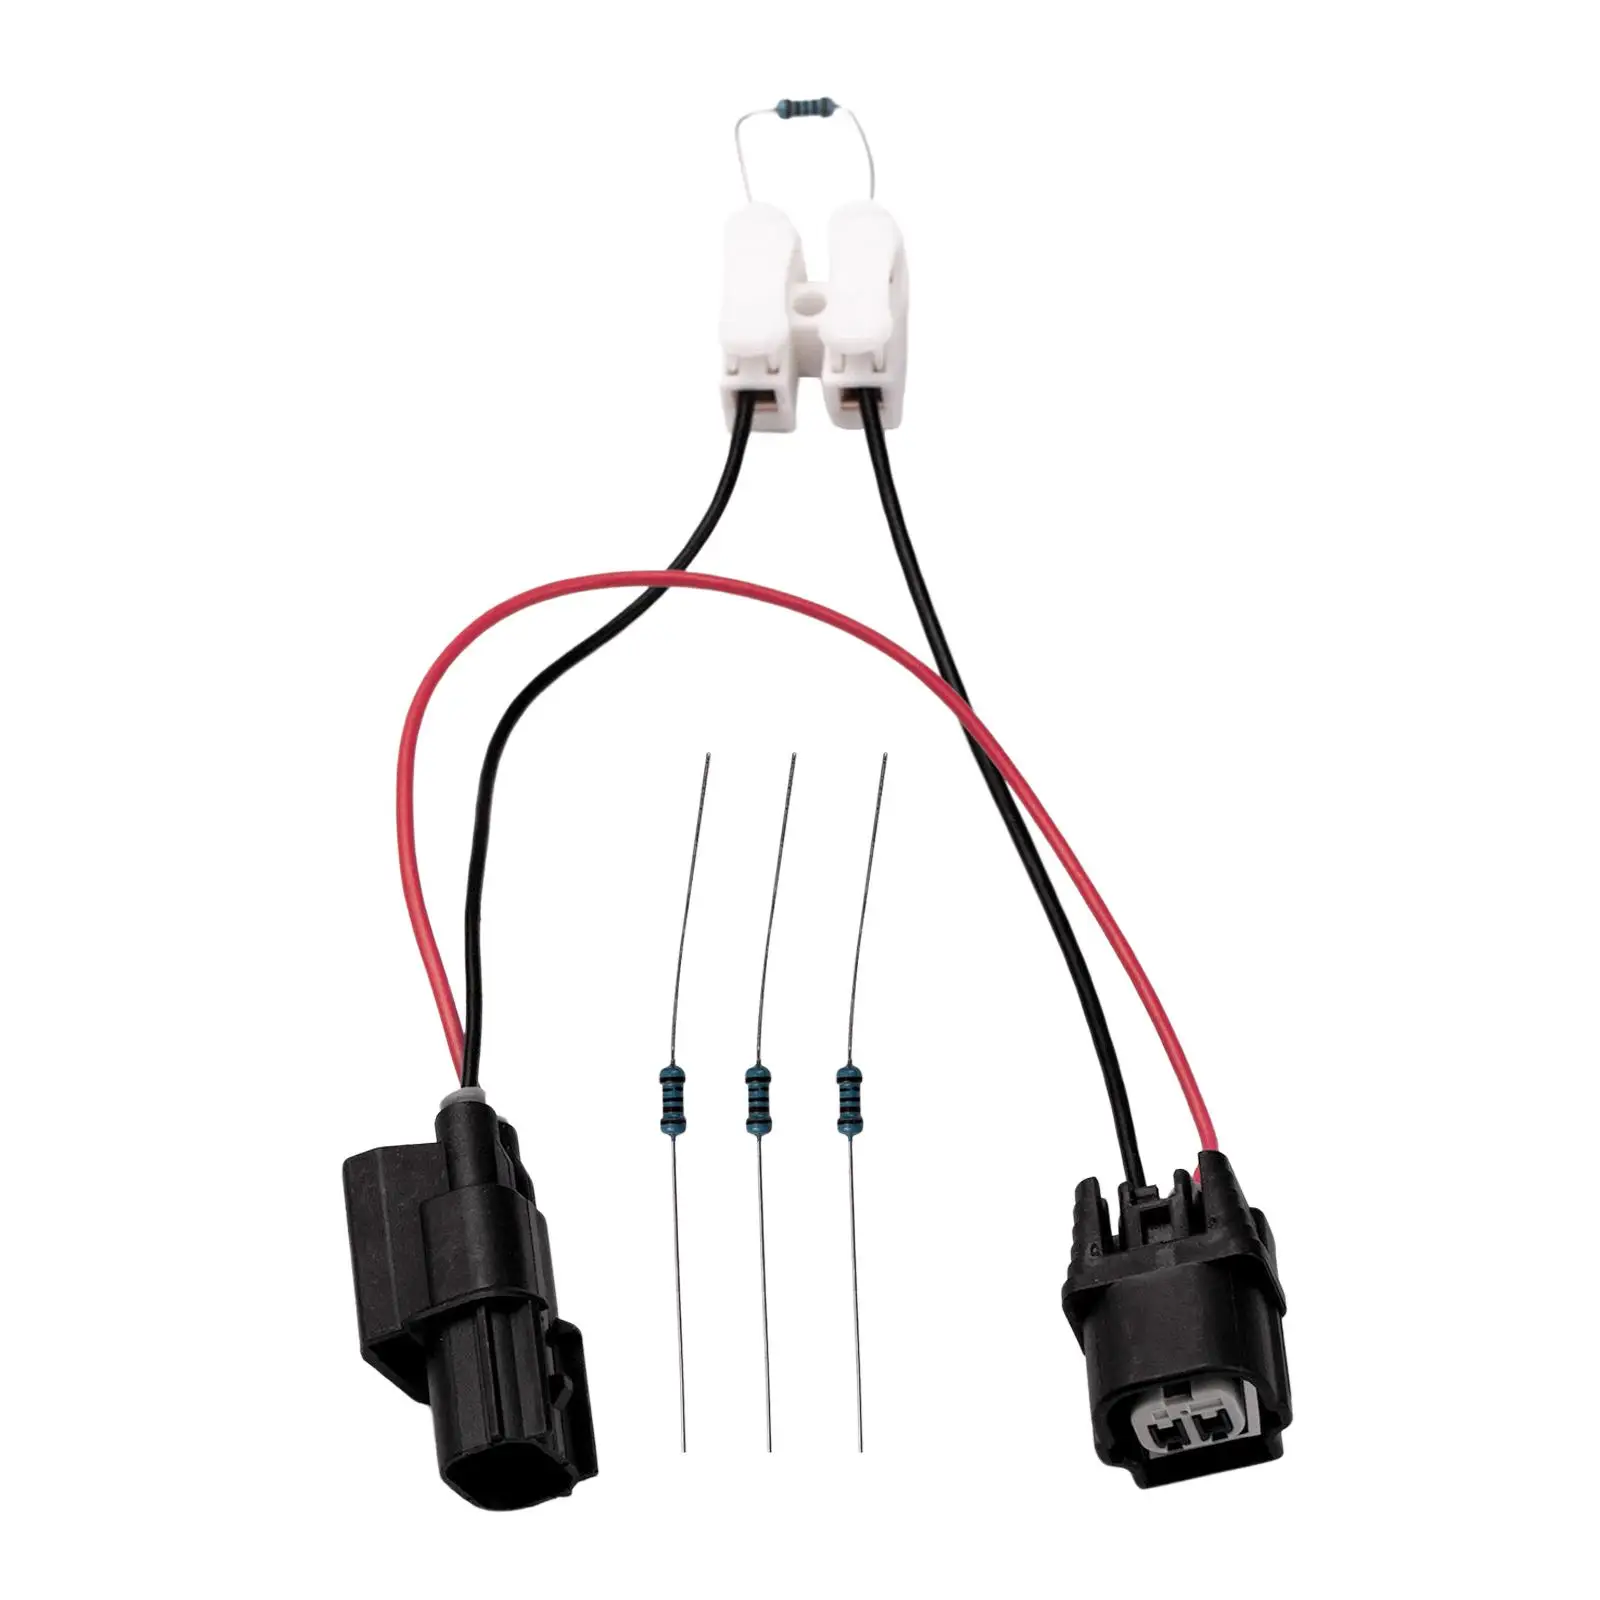 

VCM Disable Harness Set Easy to Install Complete VCM Harness with Plug for 3.5L V6 Engine with VCM Car Accessories